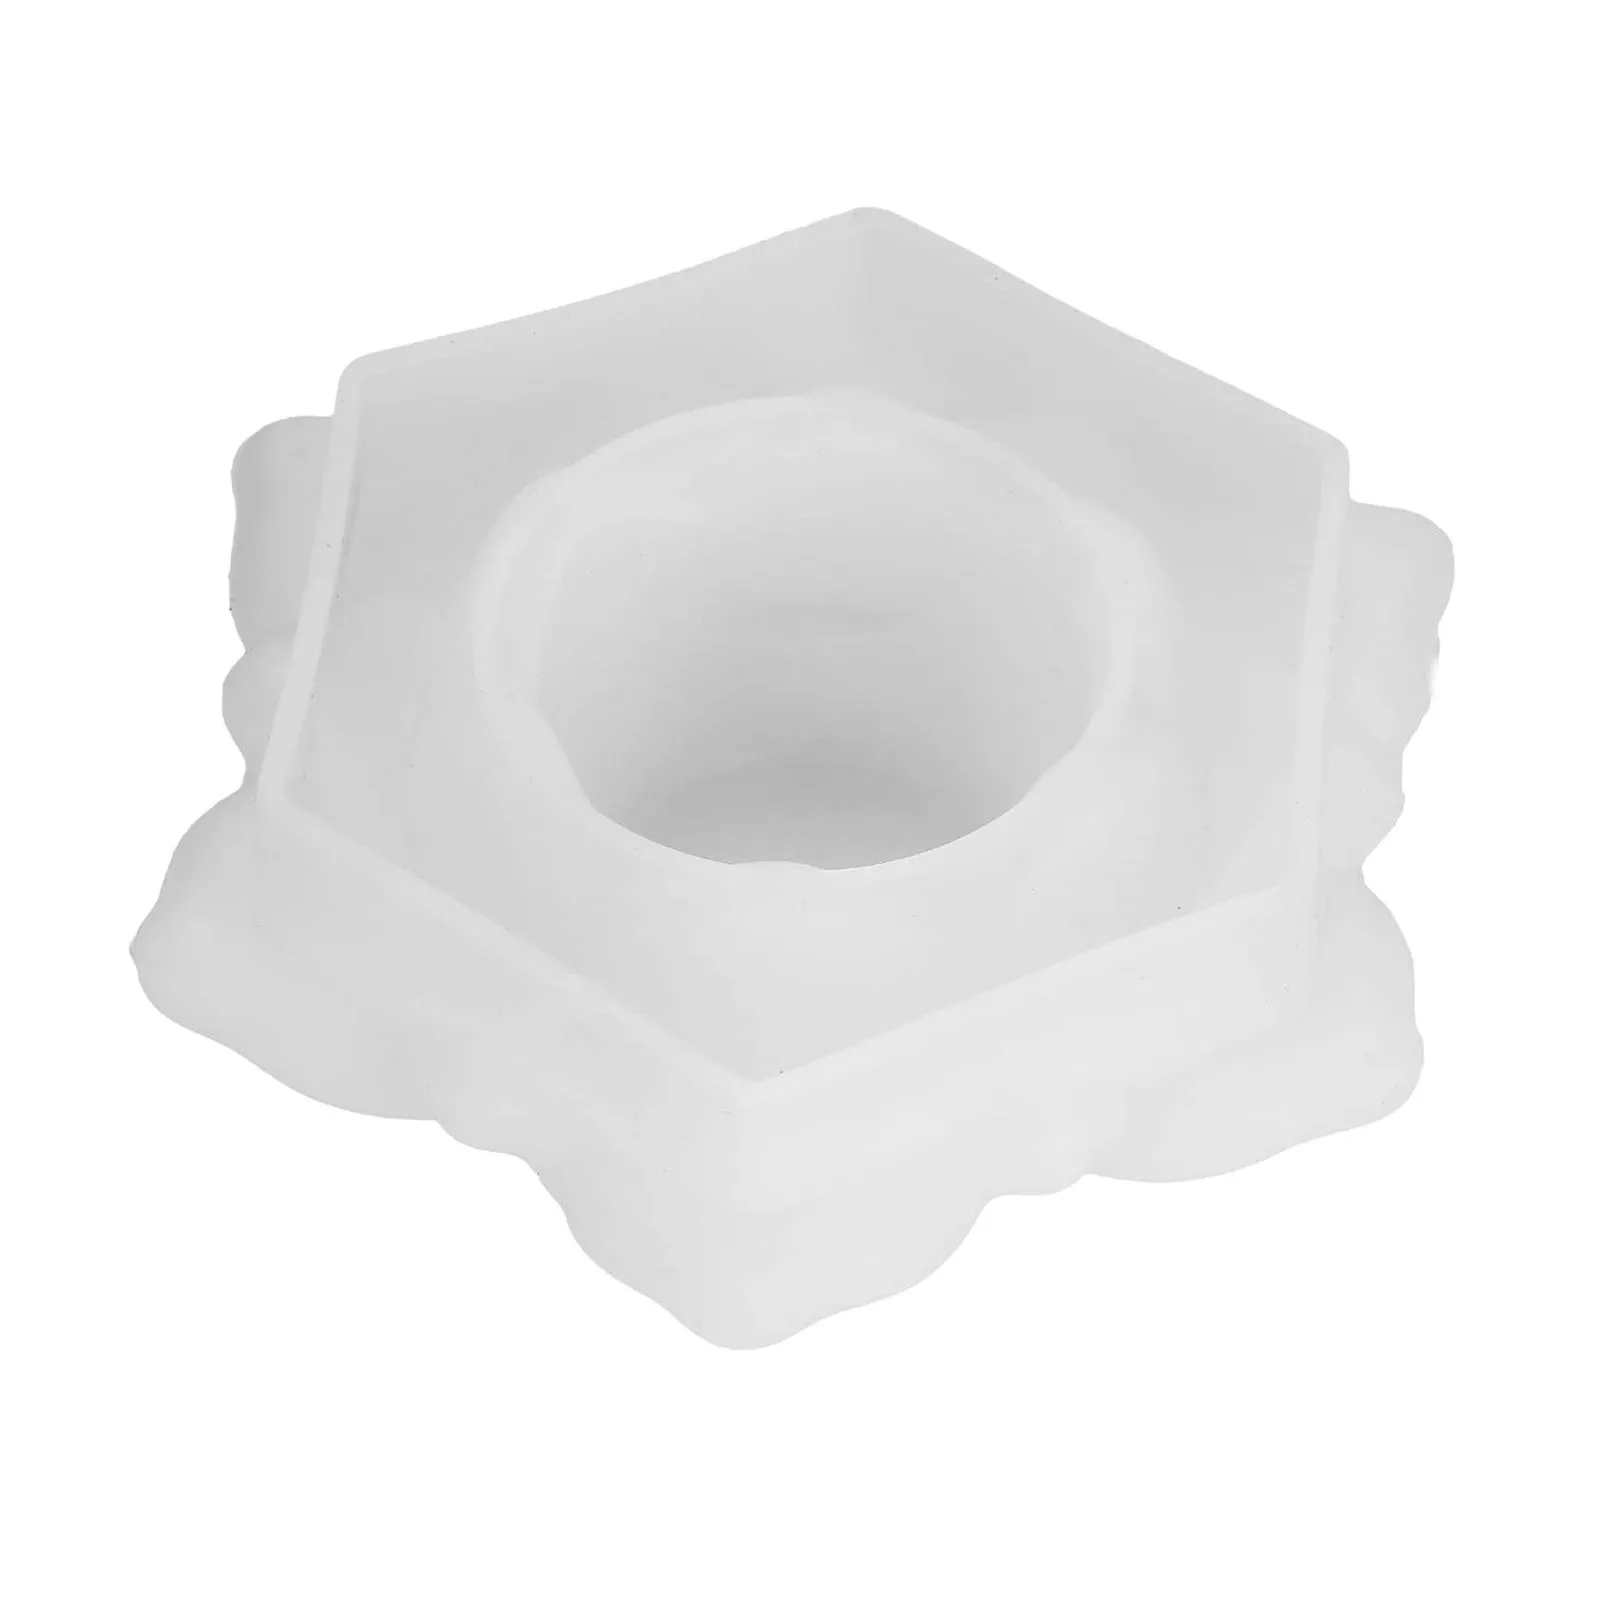 

DIY 3D Lotus Candle Holder Silicone Mold Epoxy Silicone Flower Candle Mold Food Grade Epoxy Resin Casting Molds Decoration Too